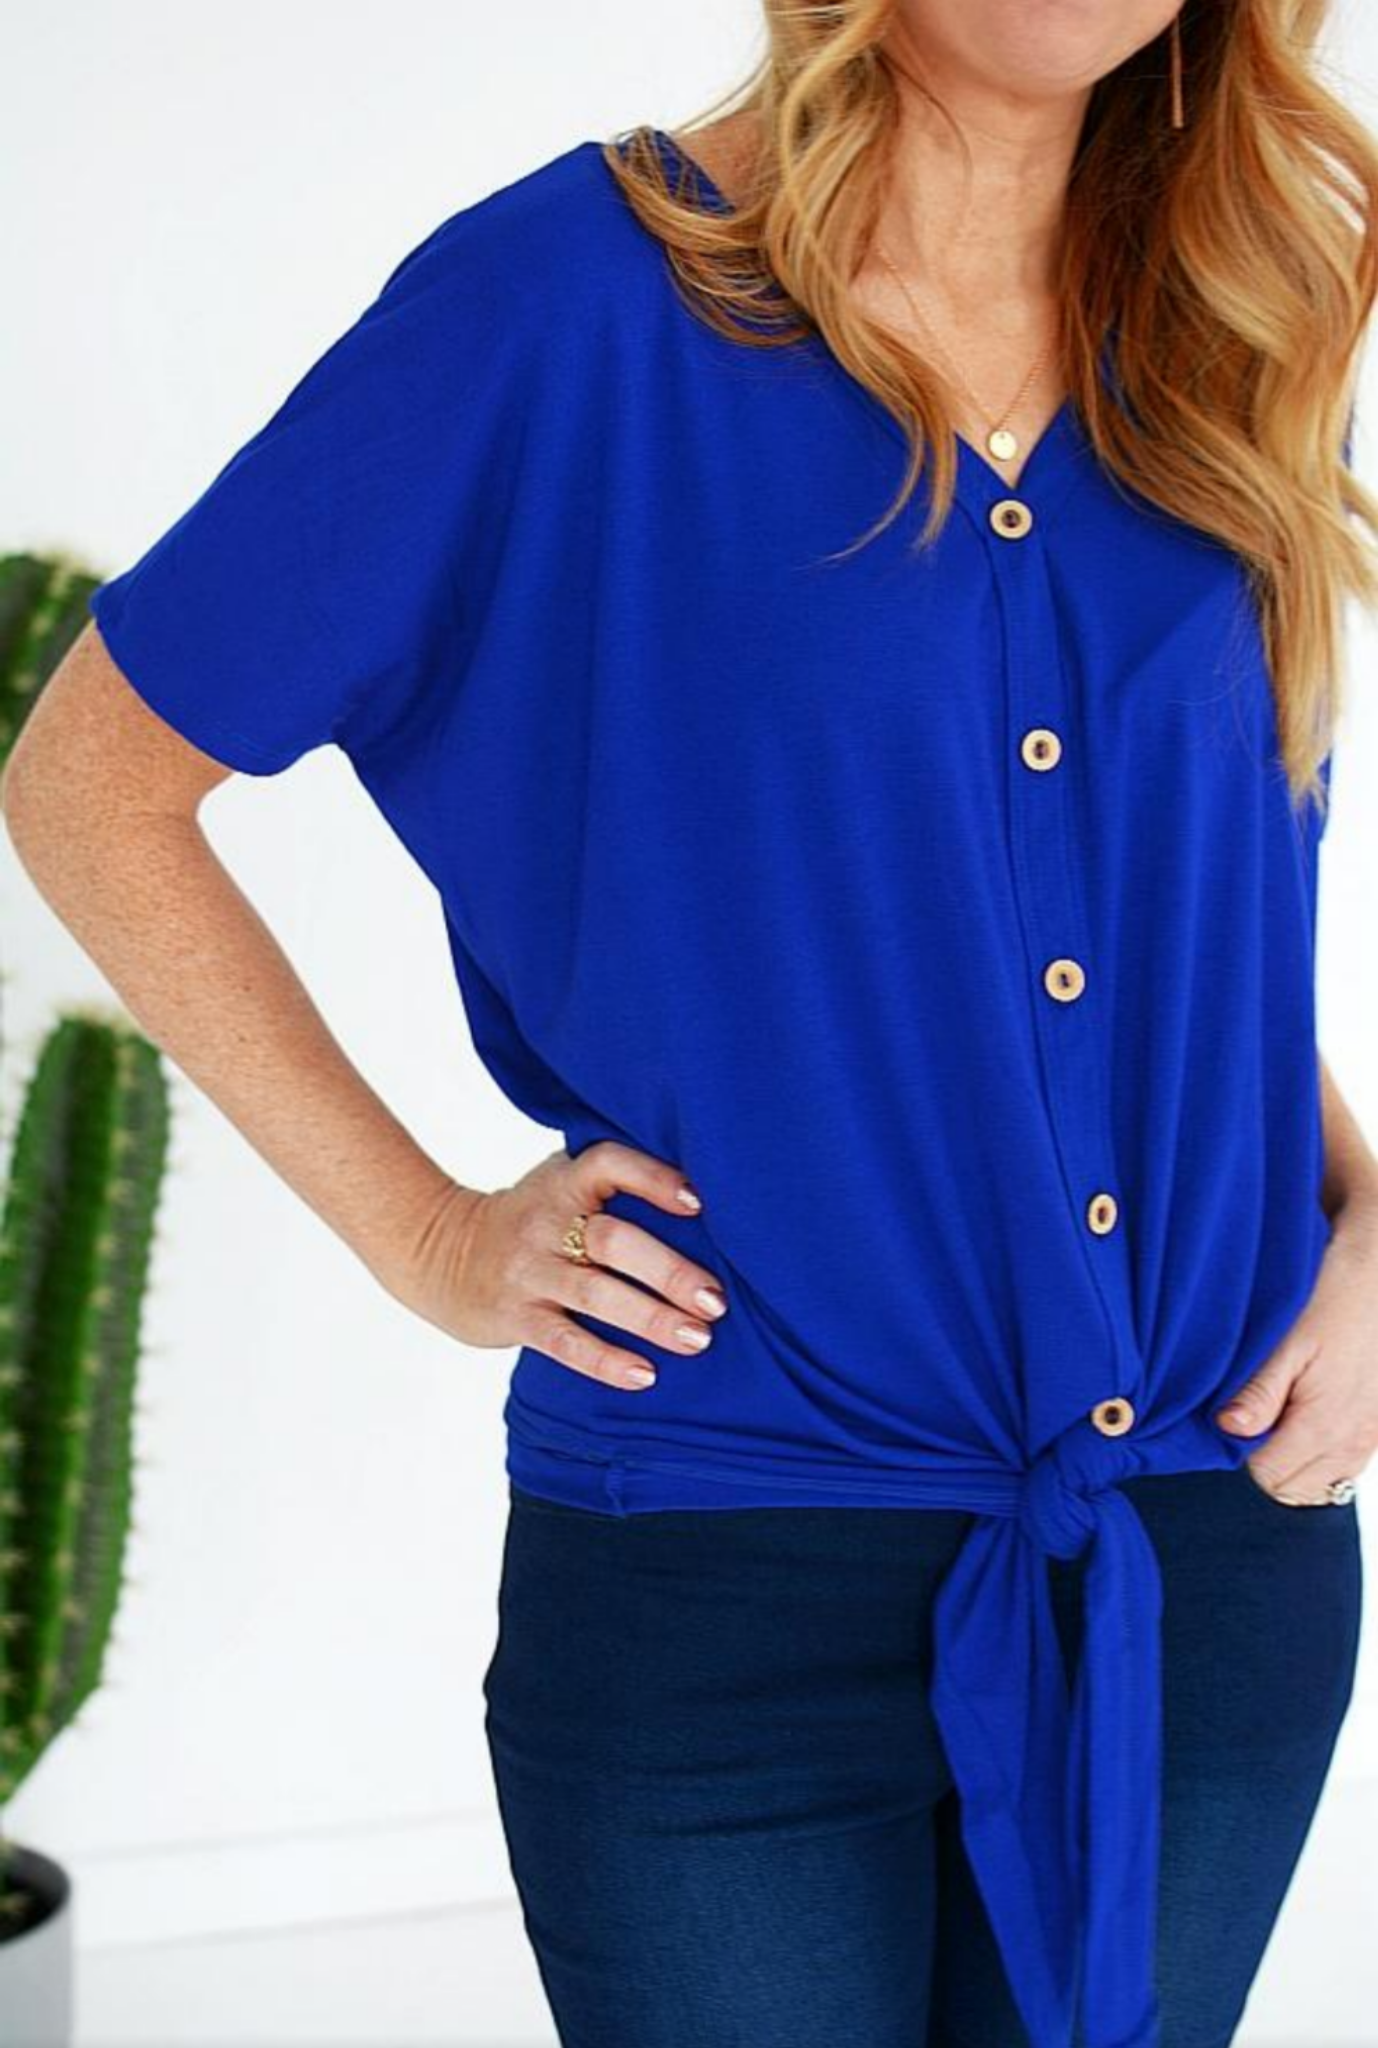 Get Up & Go Front Knot Top - All Sales Final